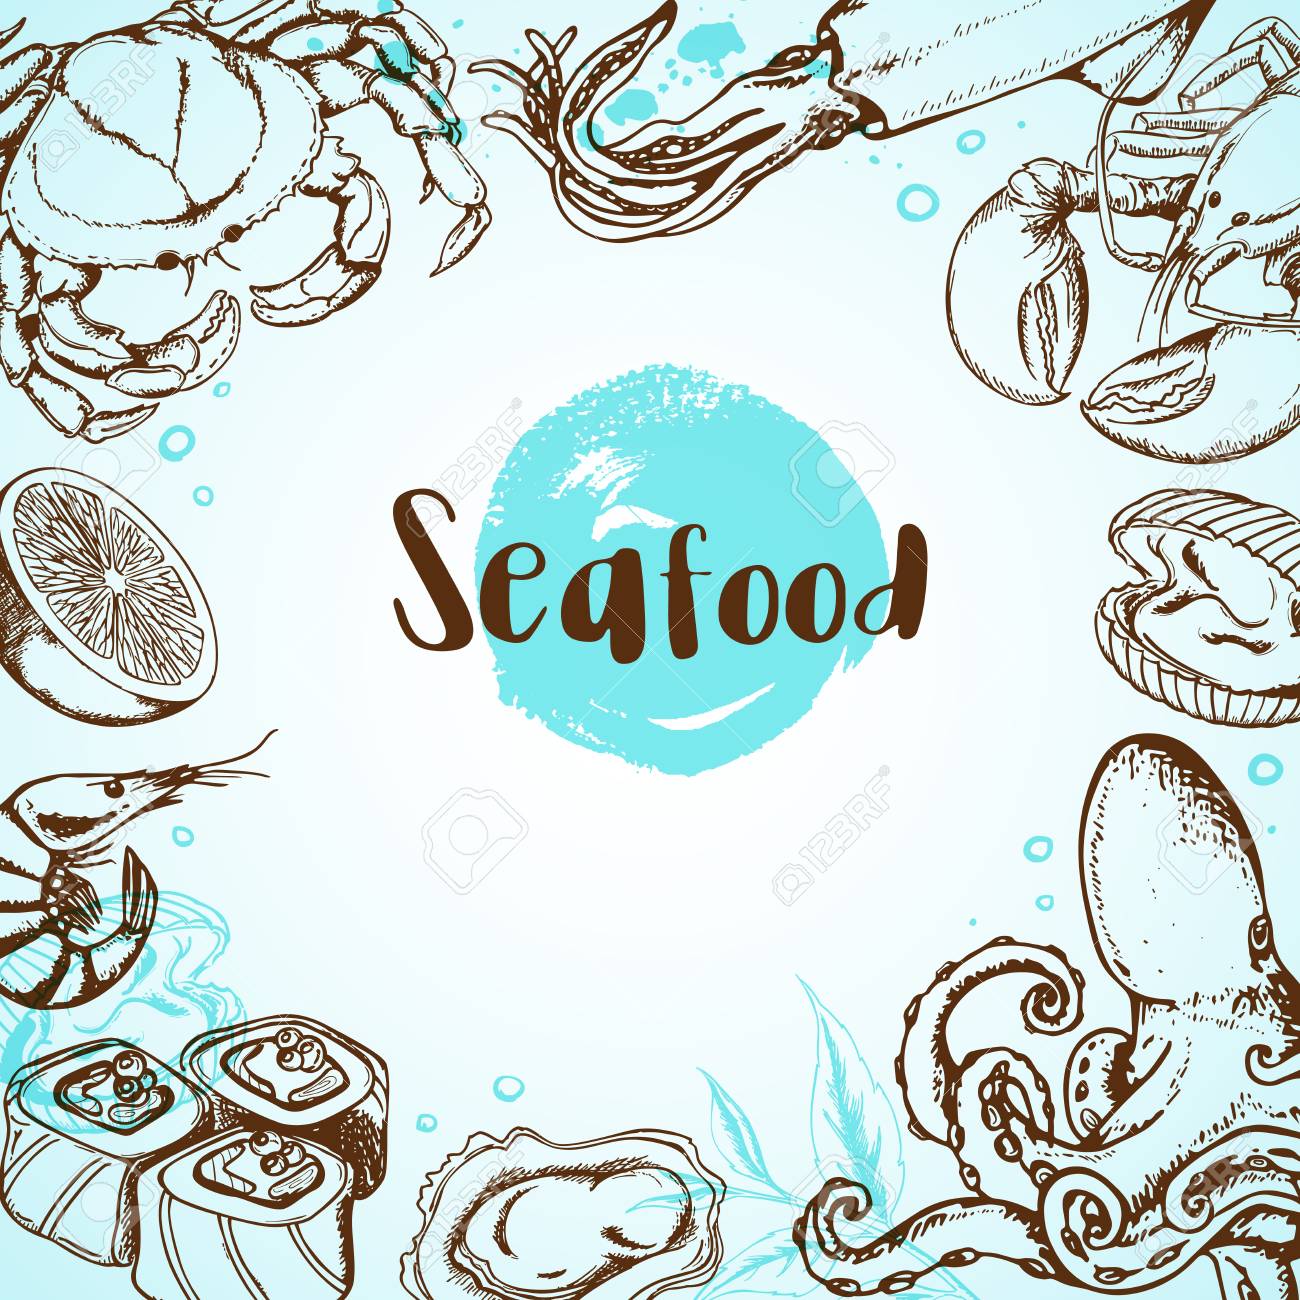 Vintage Seafood Menu Background With Octopus Crab Shrimp And